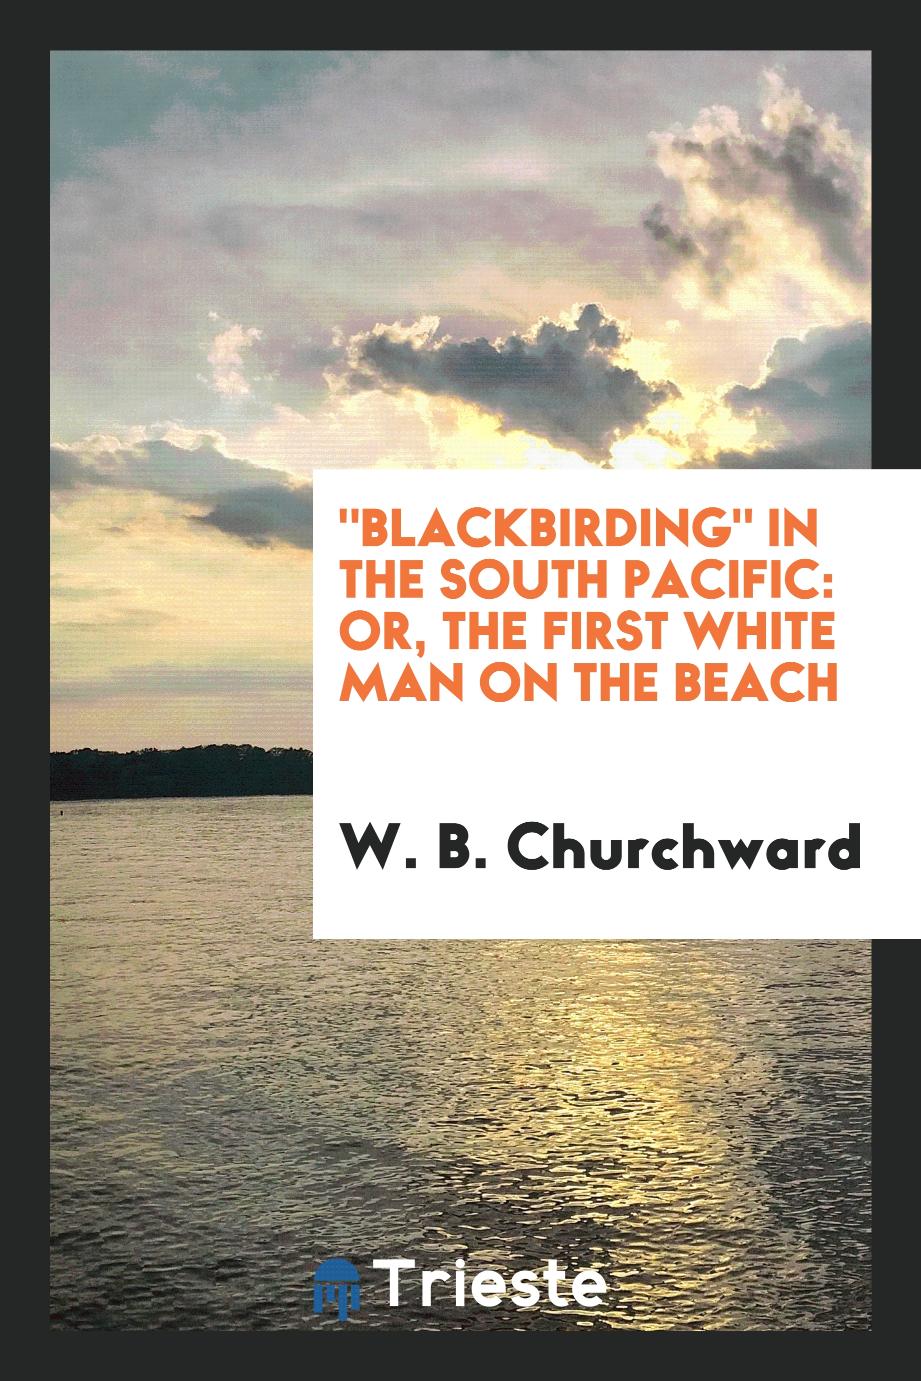 "Blackbirding" in the South Pacific: Or, the First White Man on the Beach